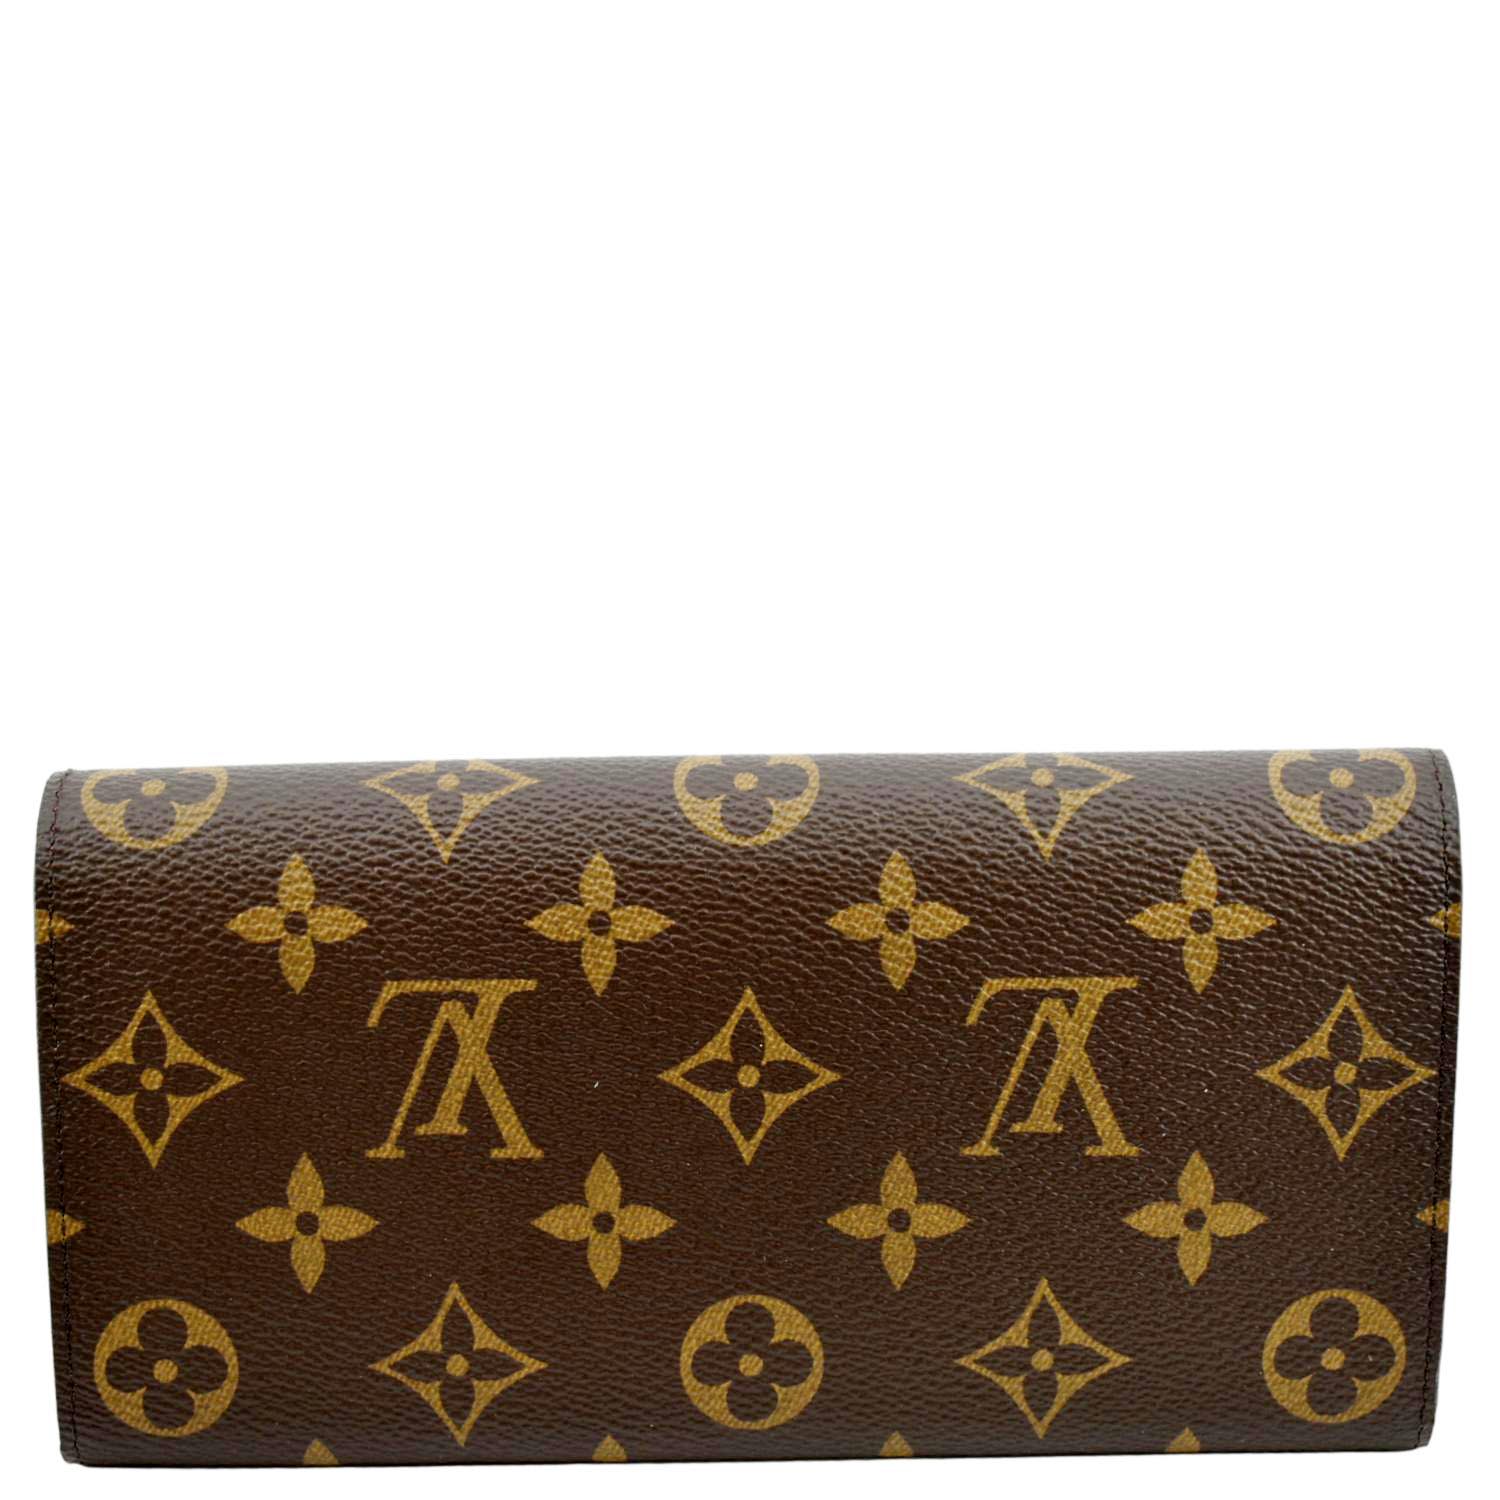 Ysl bag Price $128 - Women Luxury Collections - Aliexpress